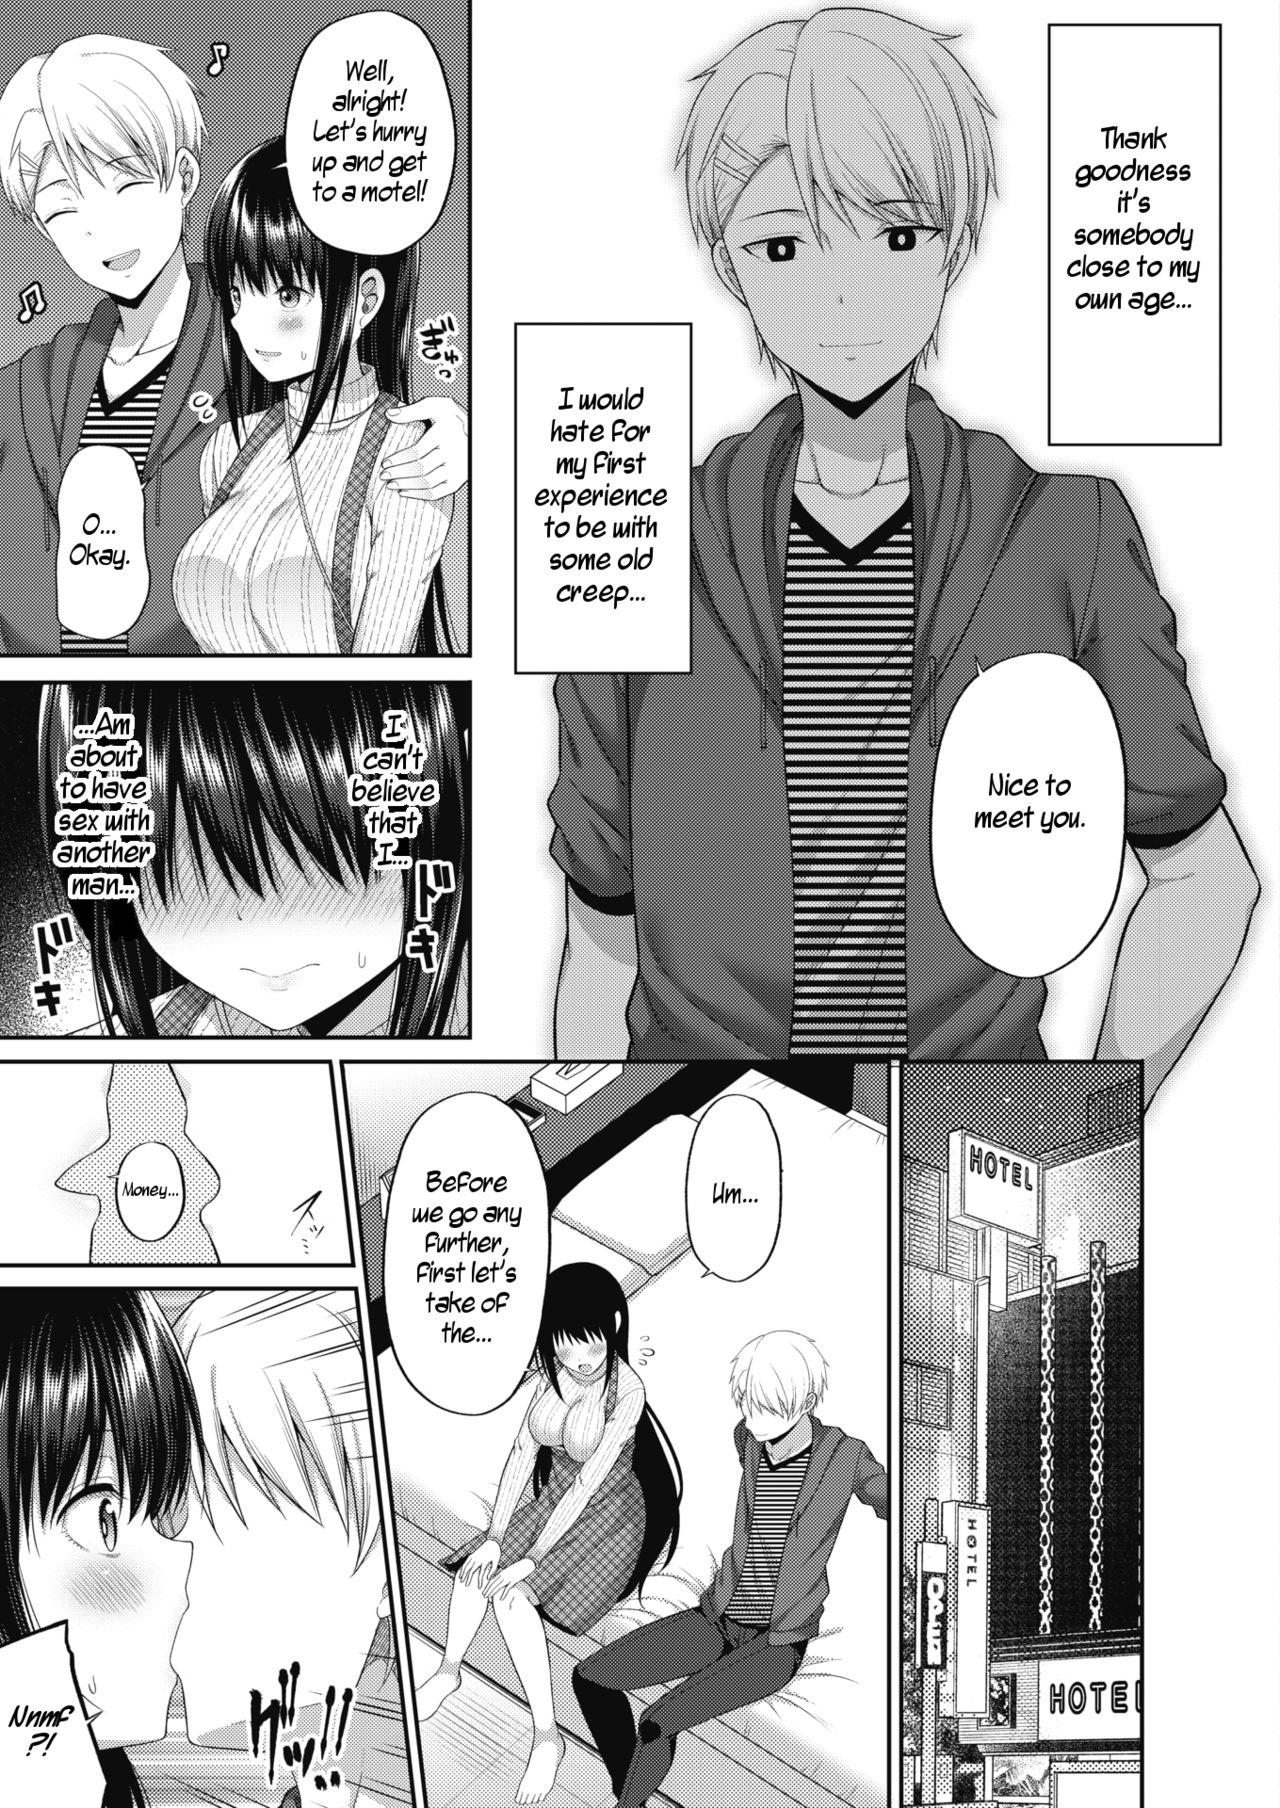 Sex Party Kizuita Ato ni wa - After noticing | After Realizing Hot Women Having Sex - Page 13